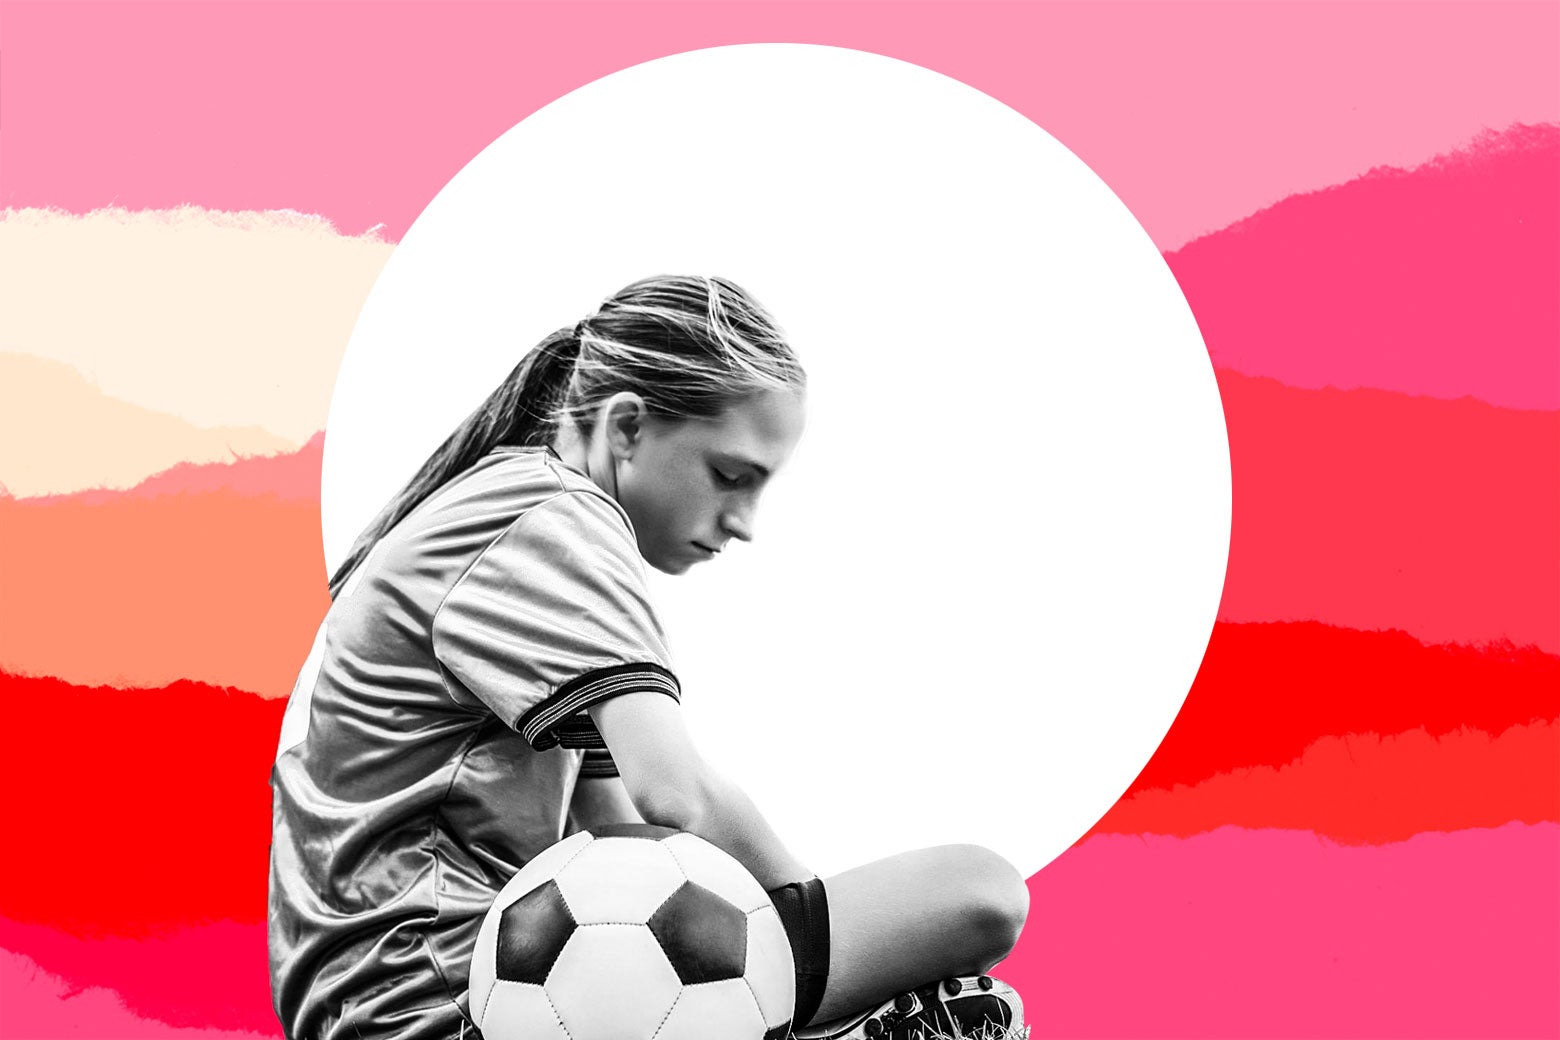 A girl in a soccer uniform sitting next to a soccer ball, looking glum.